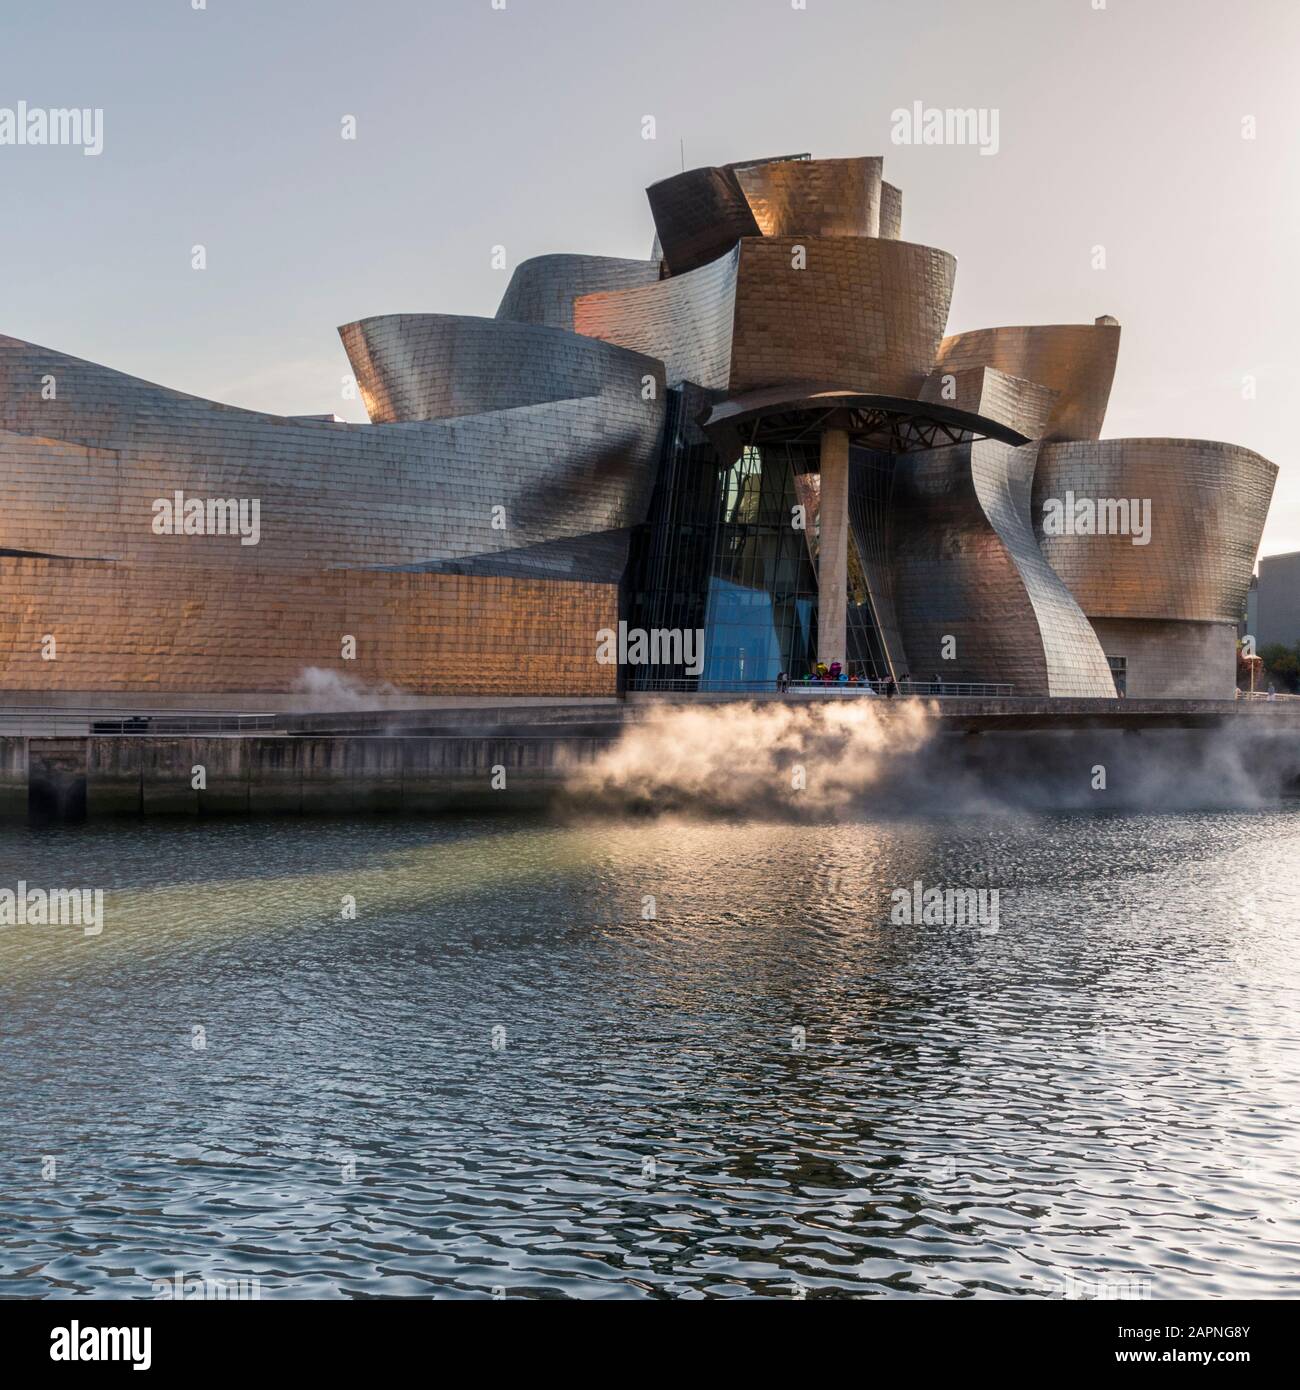 The curvy titanium cladding on the exterior of the Guggenheim Museum designed by Frank Gehry. Stock Photo